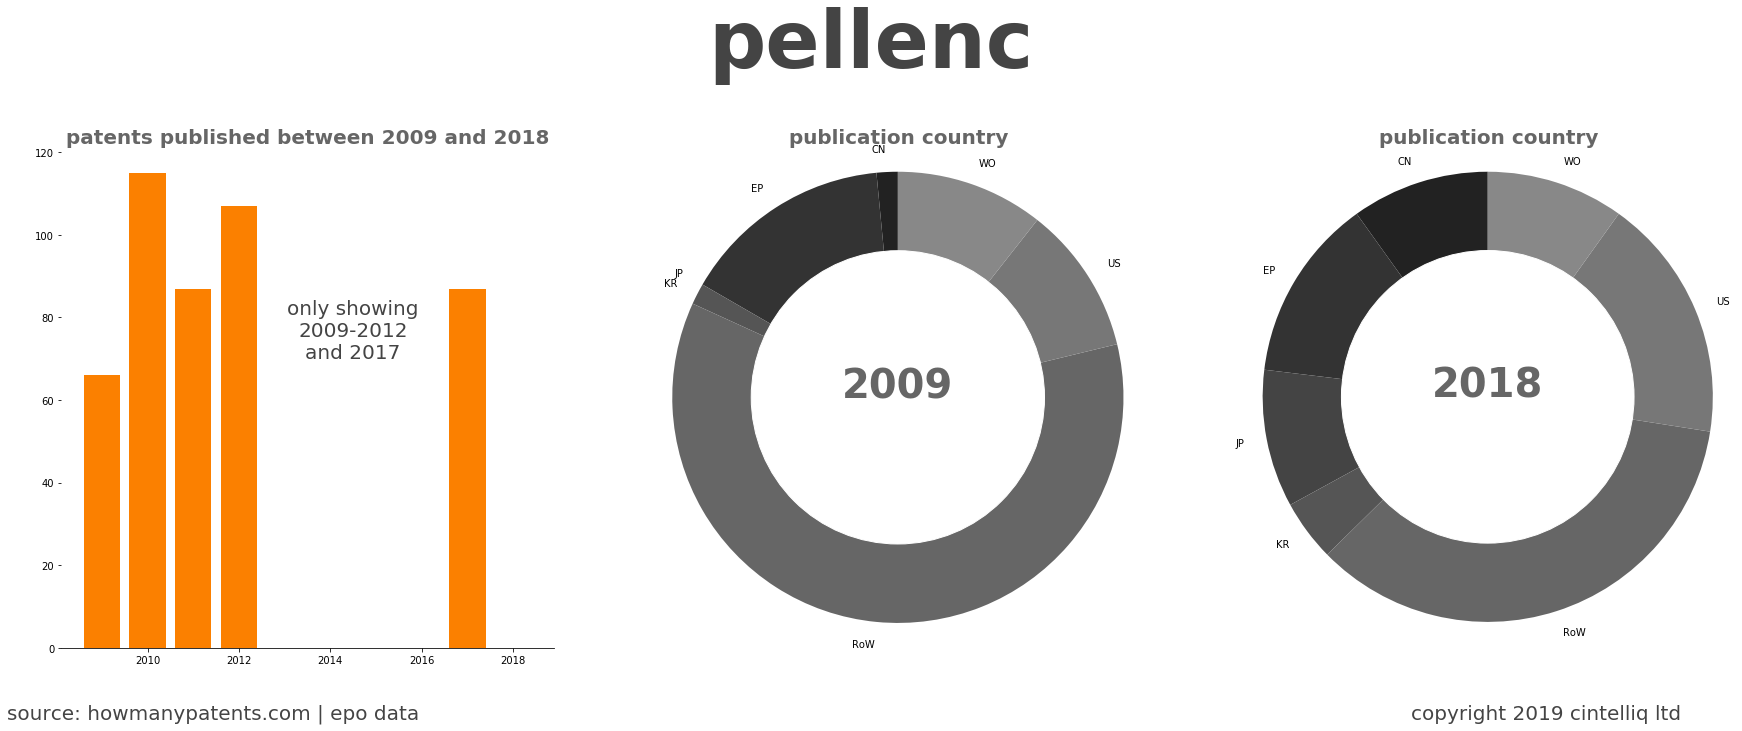 summary of patents for Pellenc